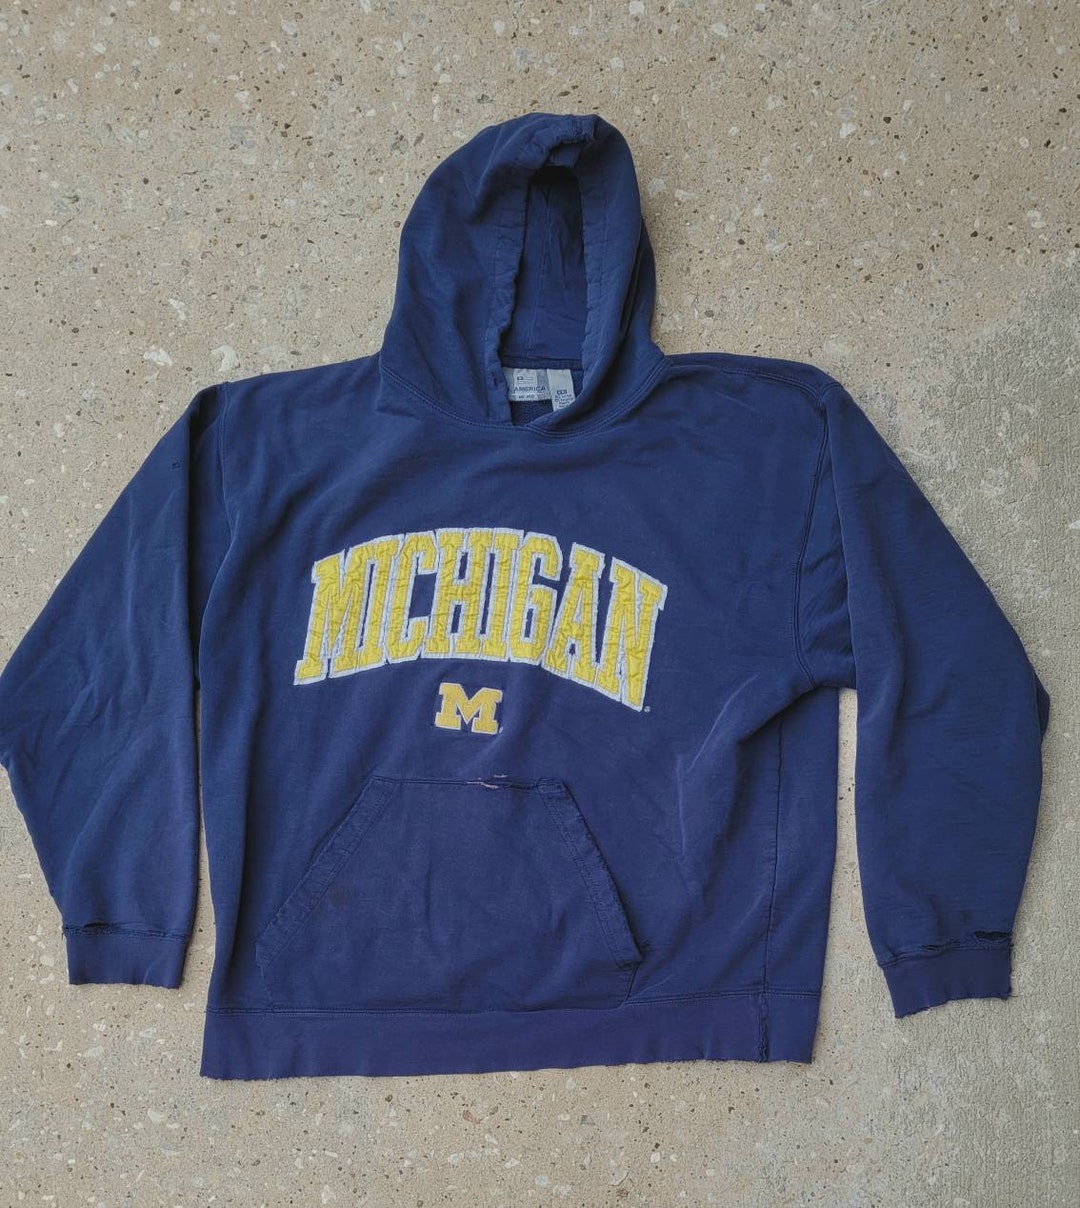  Blue 84 NCAA Michigan Wolverines Unisex Hoodie Kids Arch Over  Team Color, Michigan Wolverines Navy, Small : Sports & Outdoors